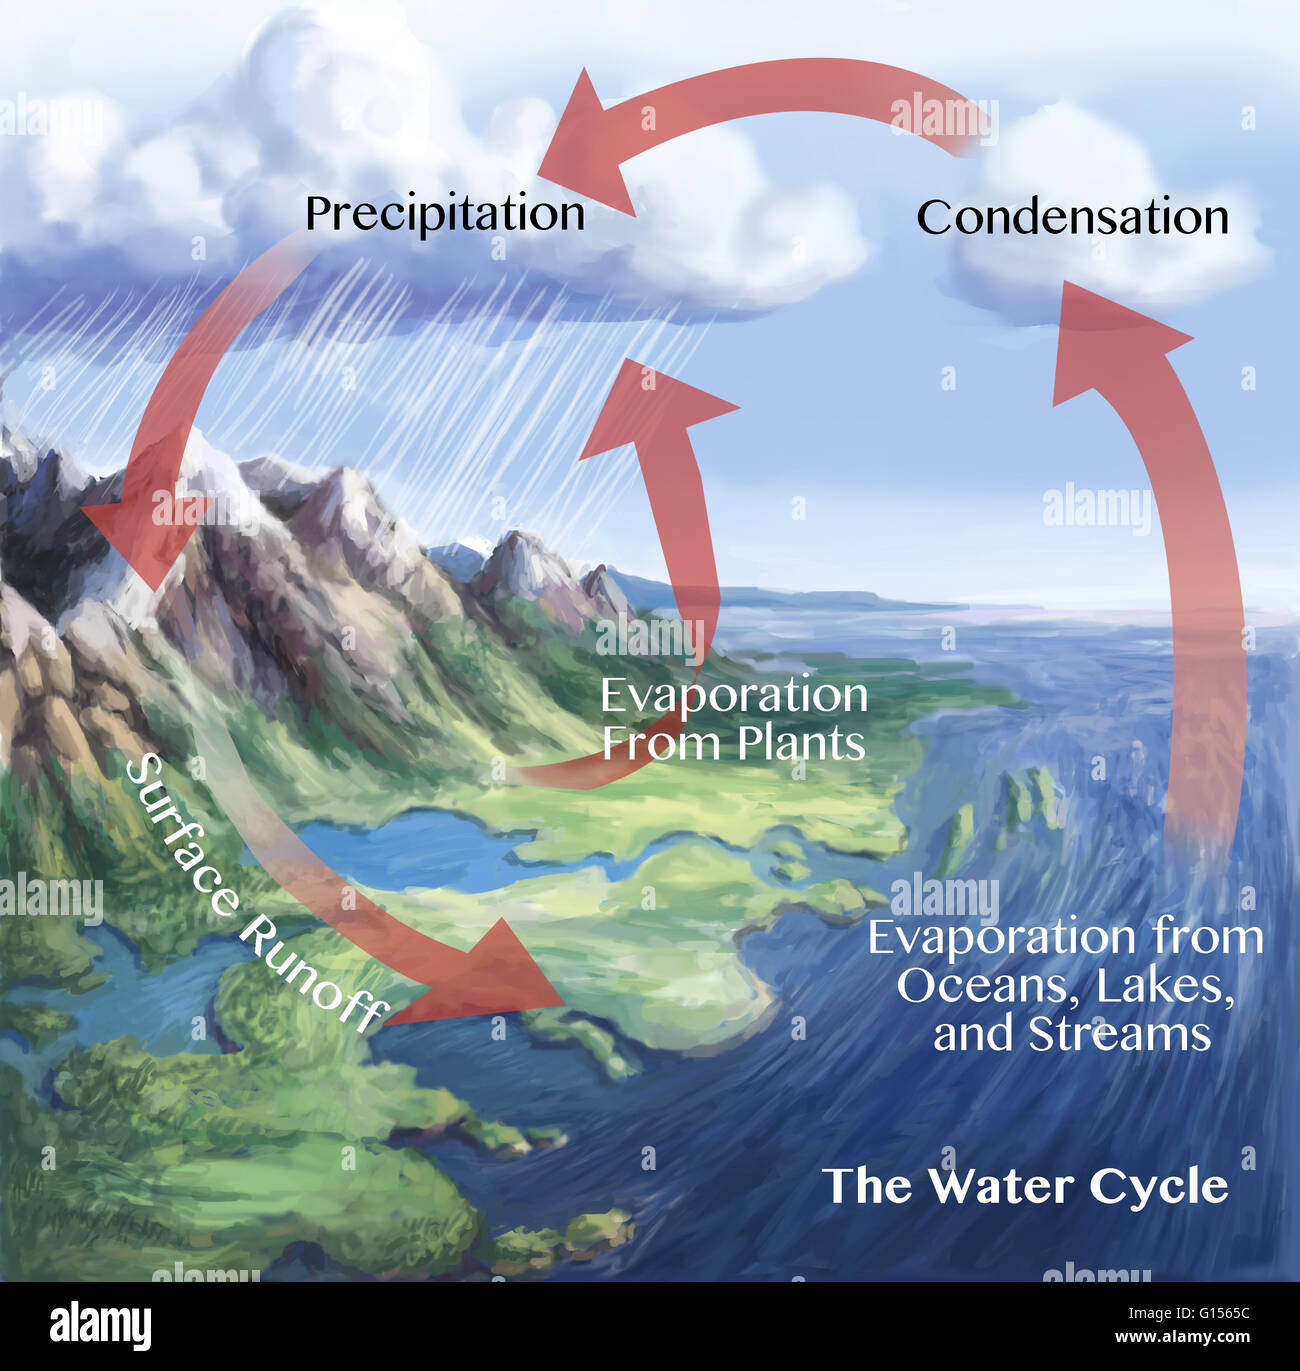 Water Cycle Illustration  The Red Arrows Here Show Some Of